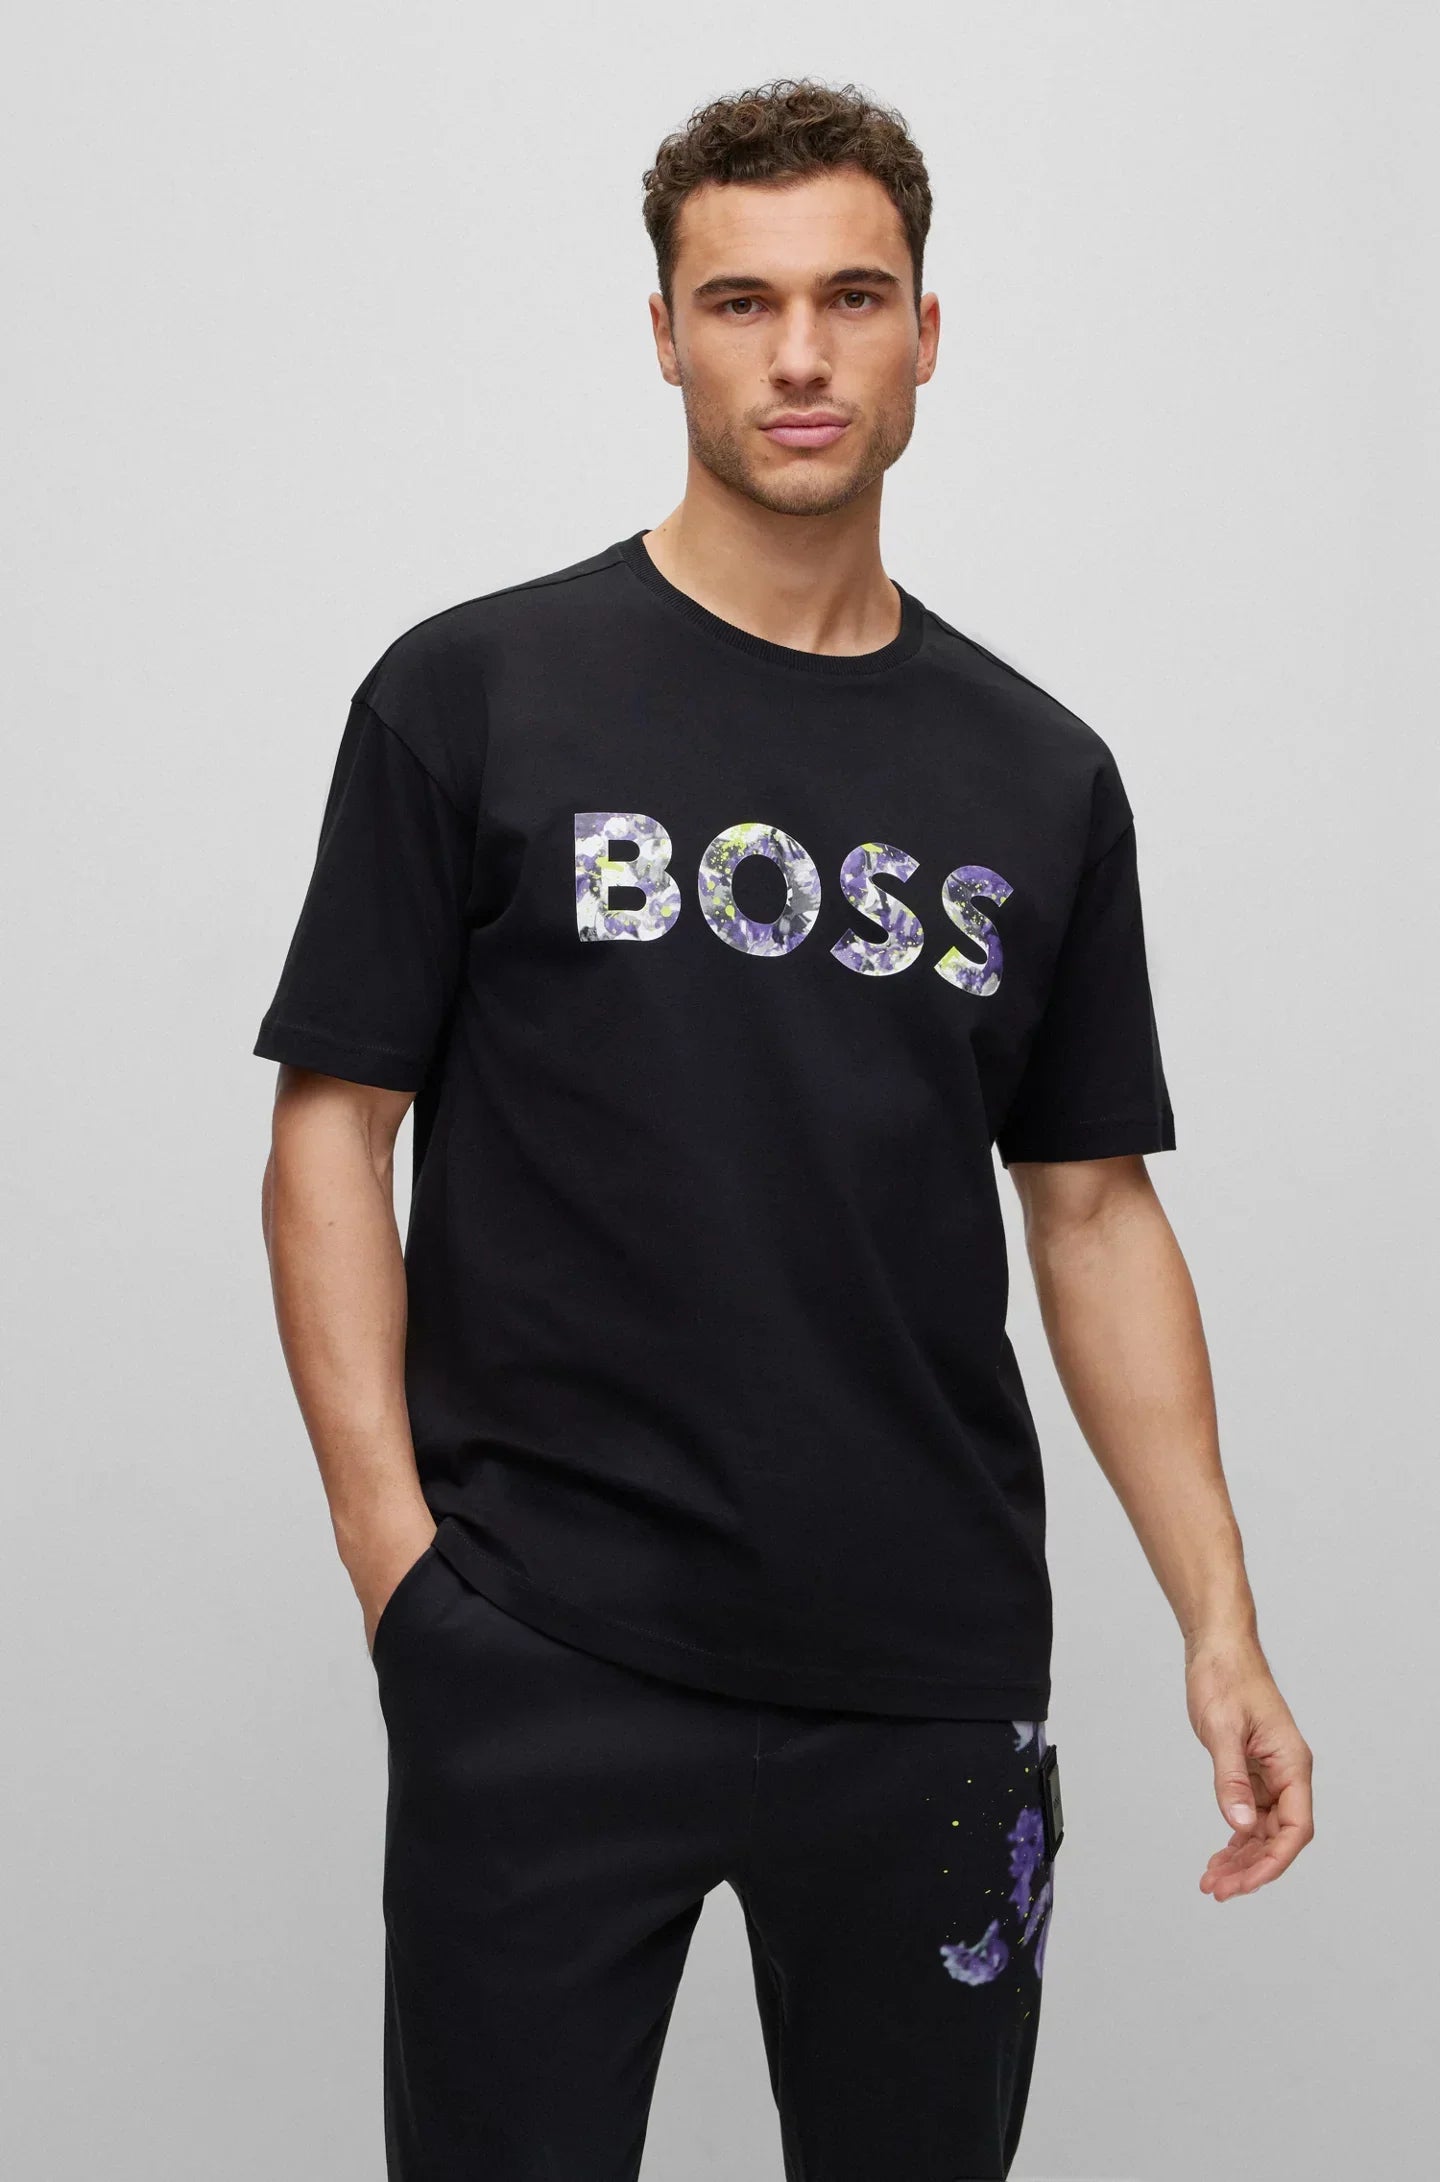 Suéter Boss Floral Print Relaxed Fit - tiendadicons.com